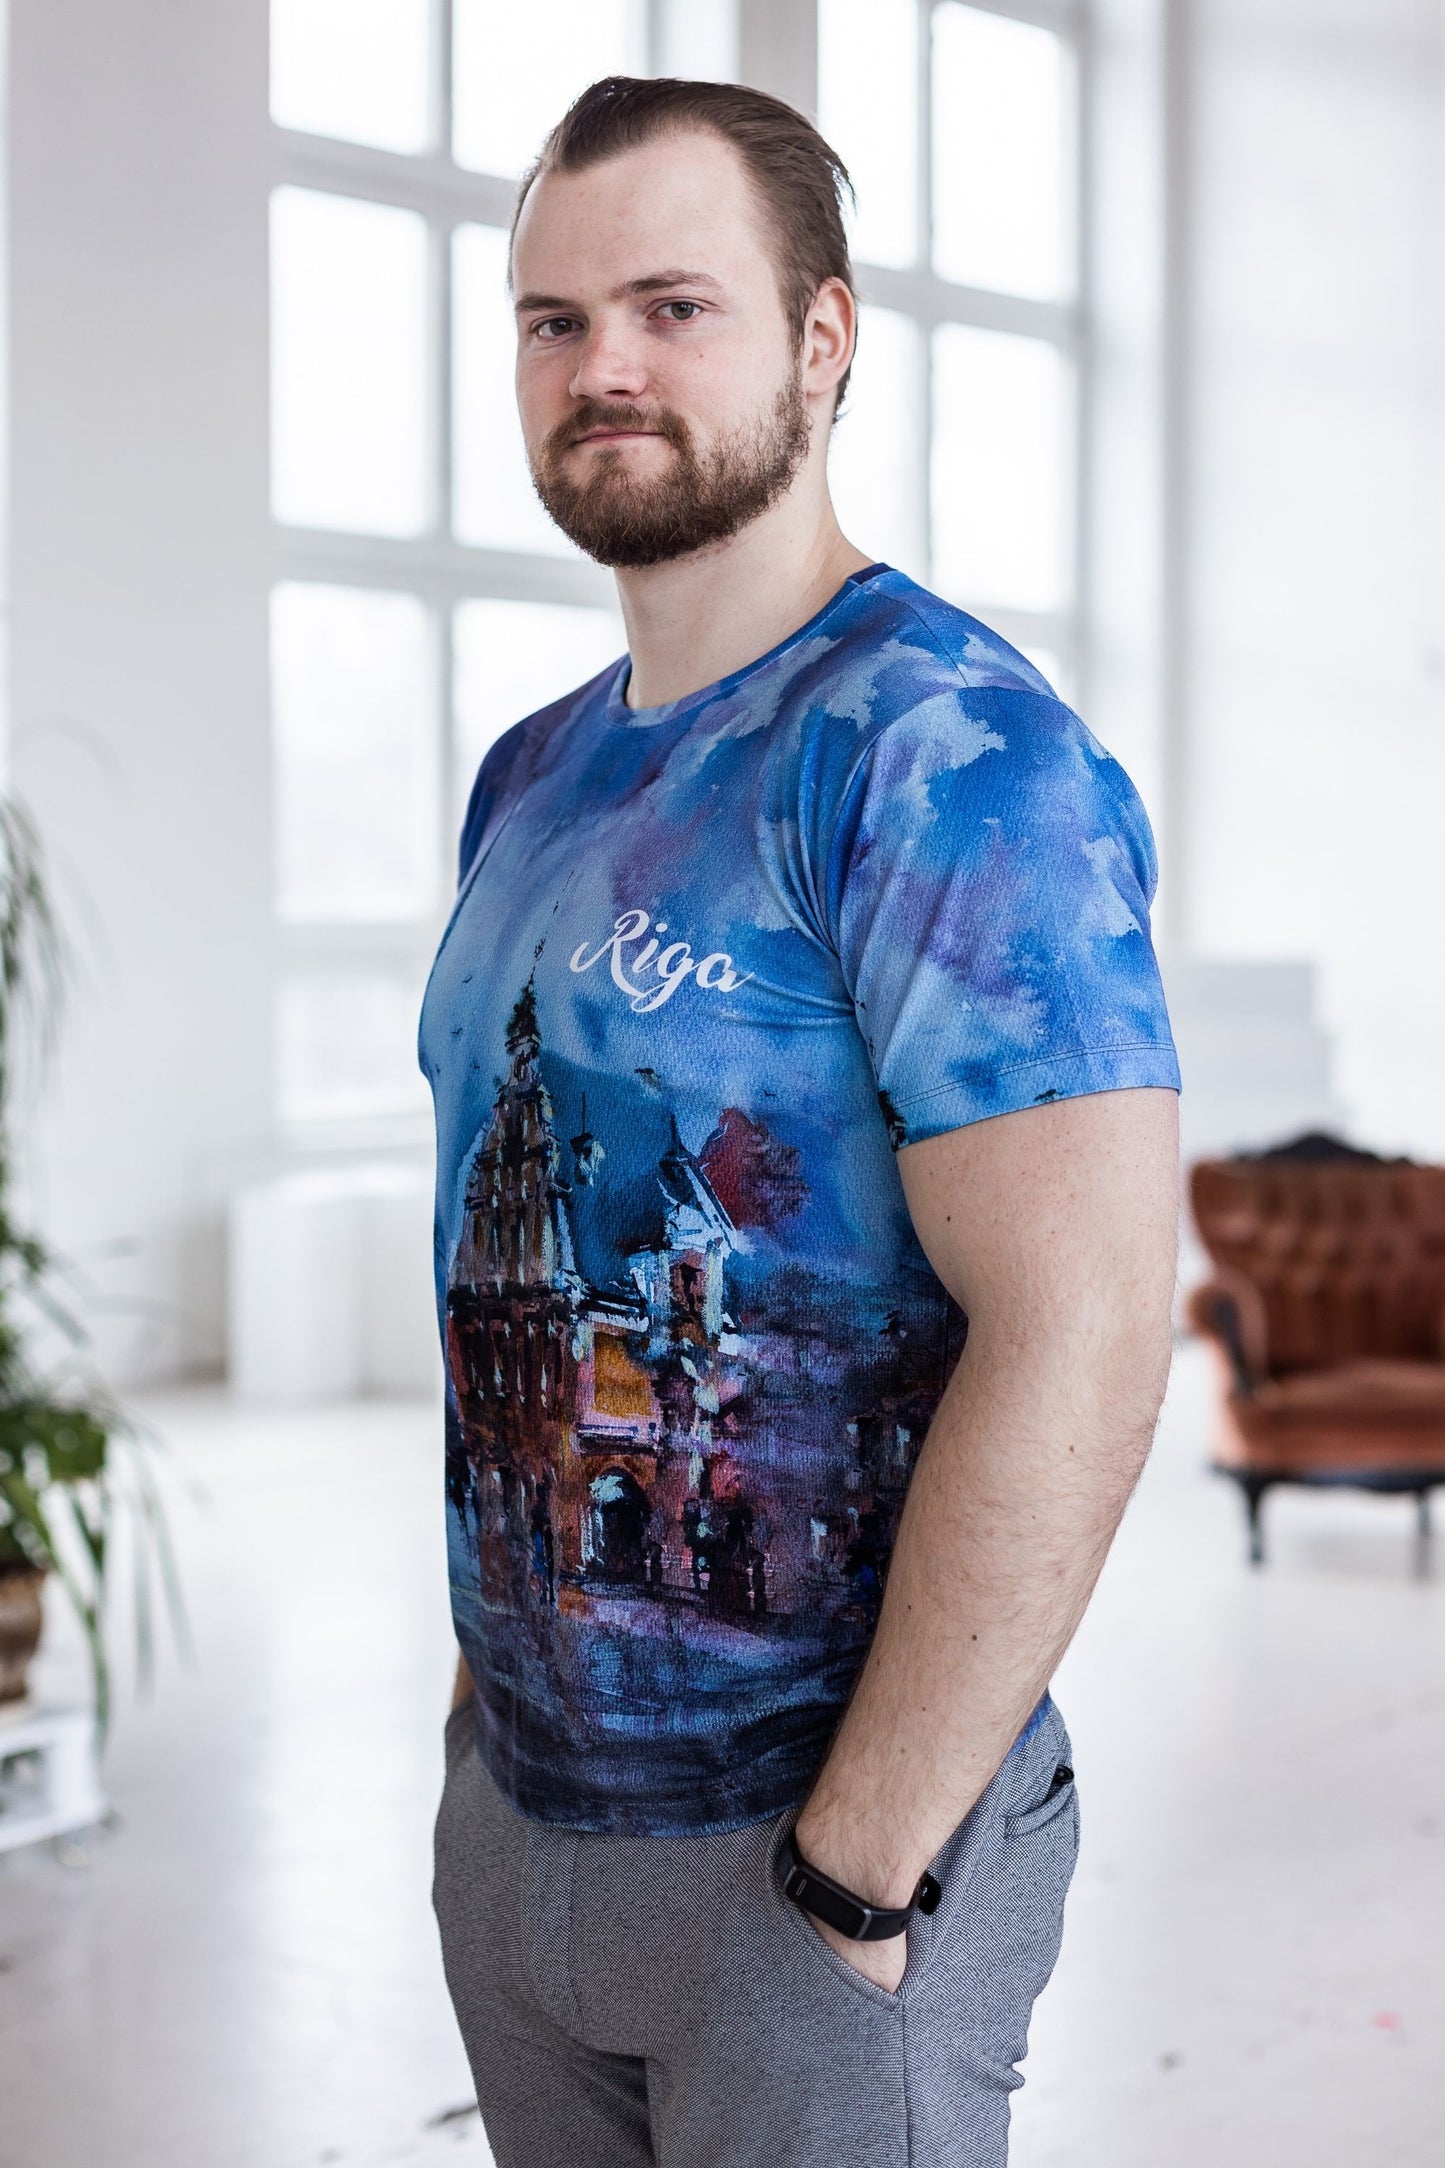 Men's T-shirt with views of Riga